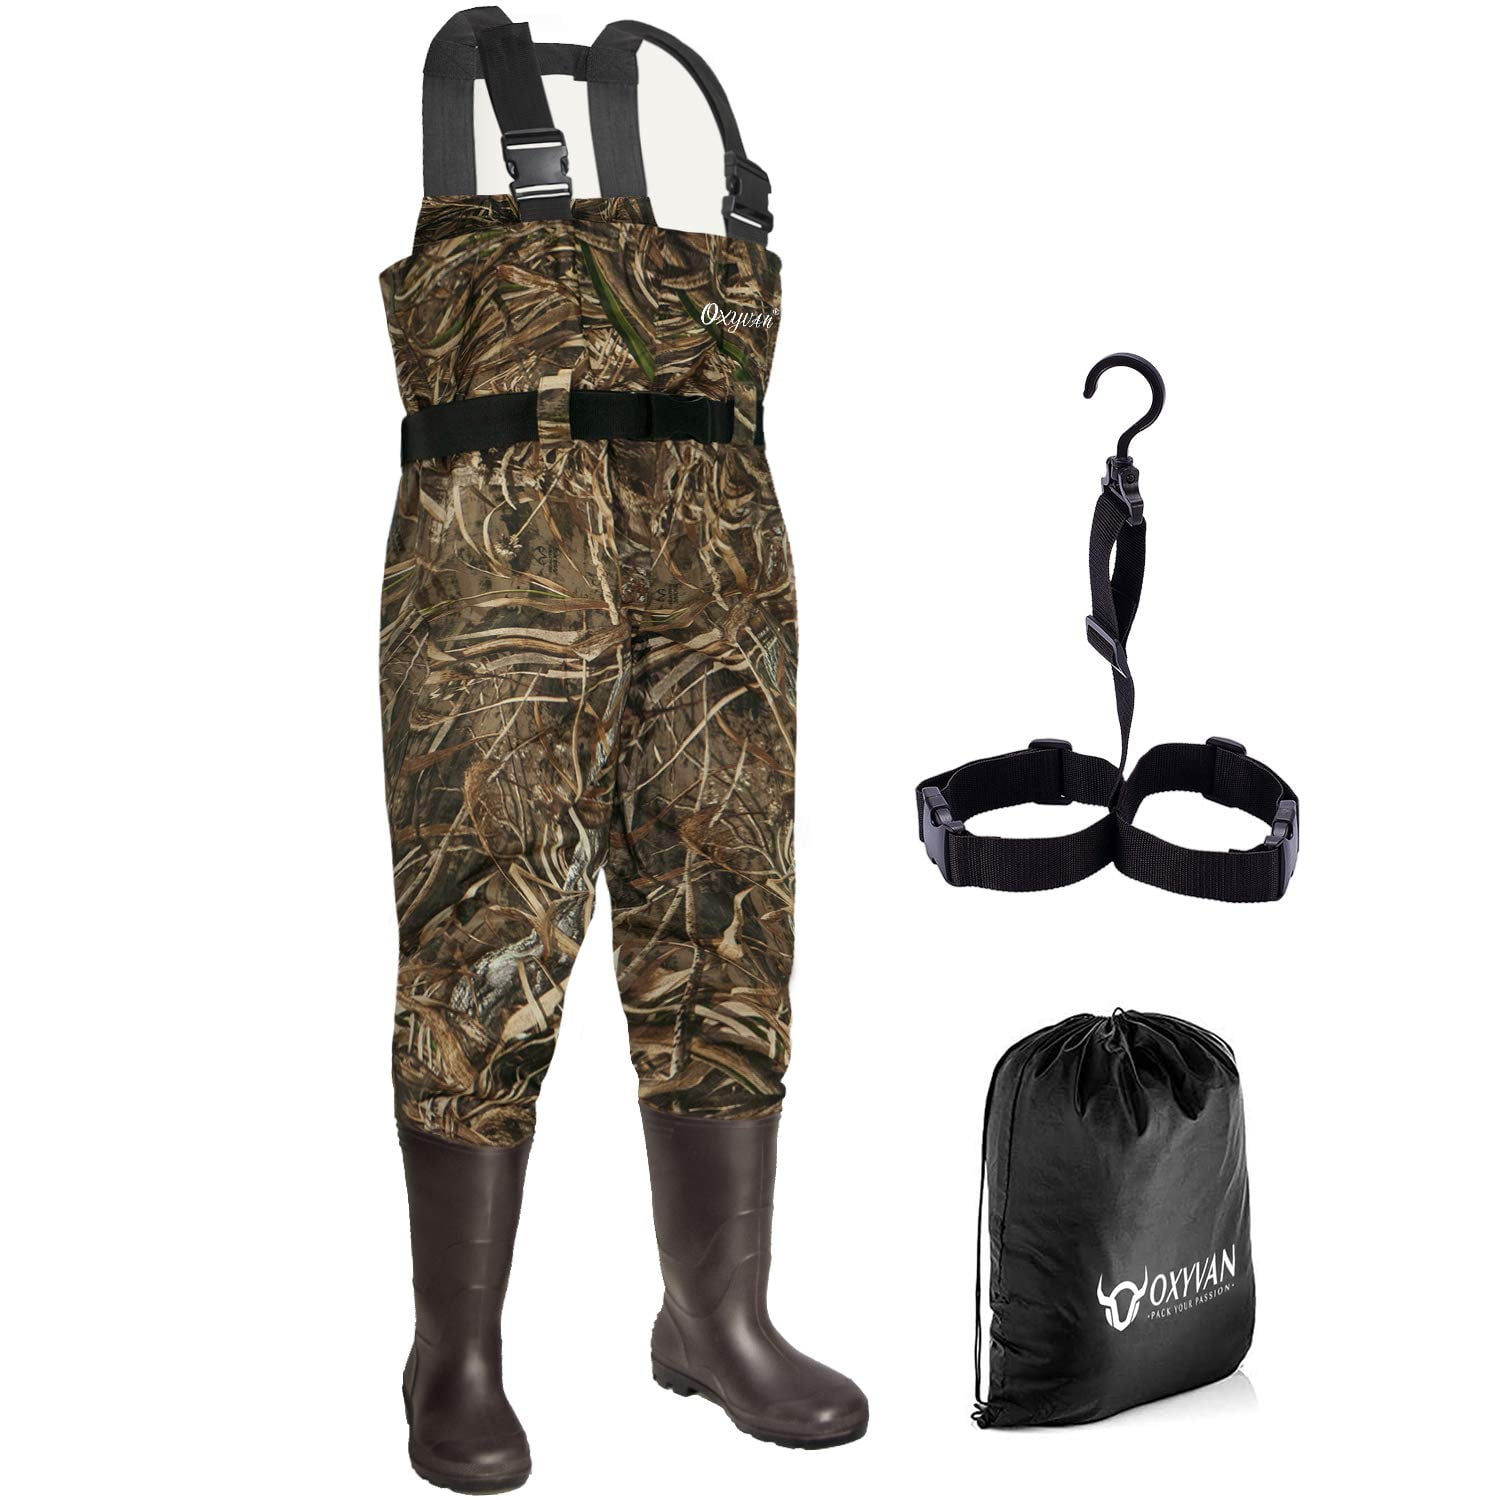 OXYVAN Chest Waders for Men & Women with Boots, Light weight Wear